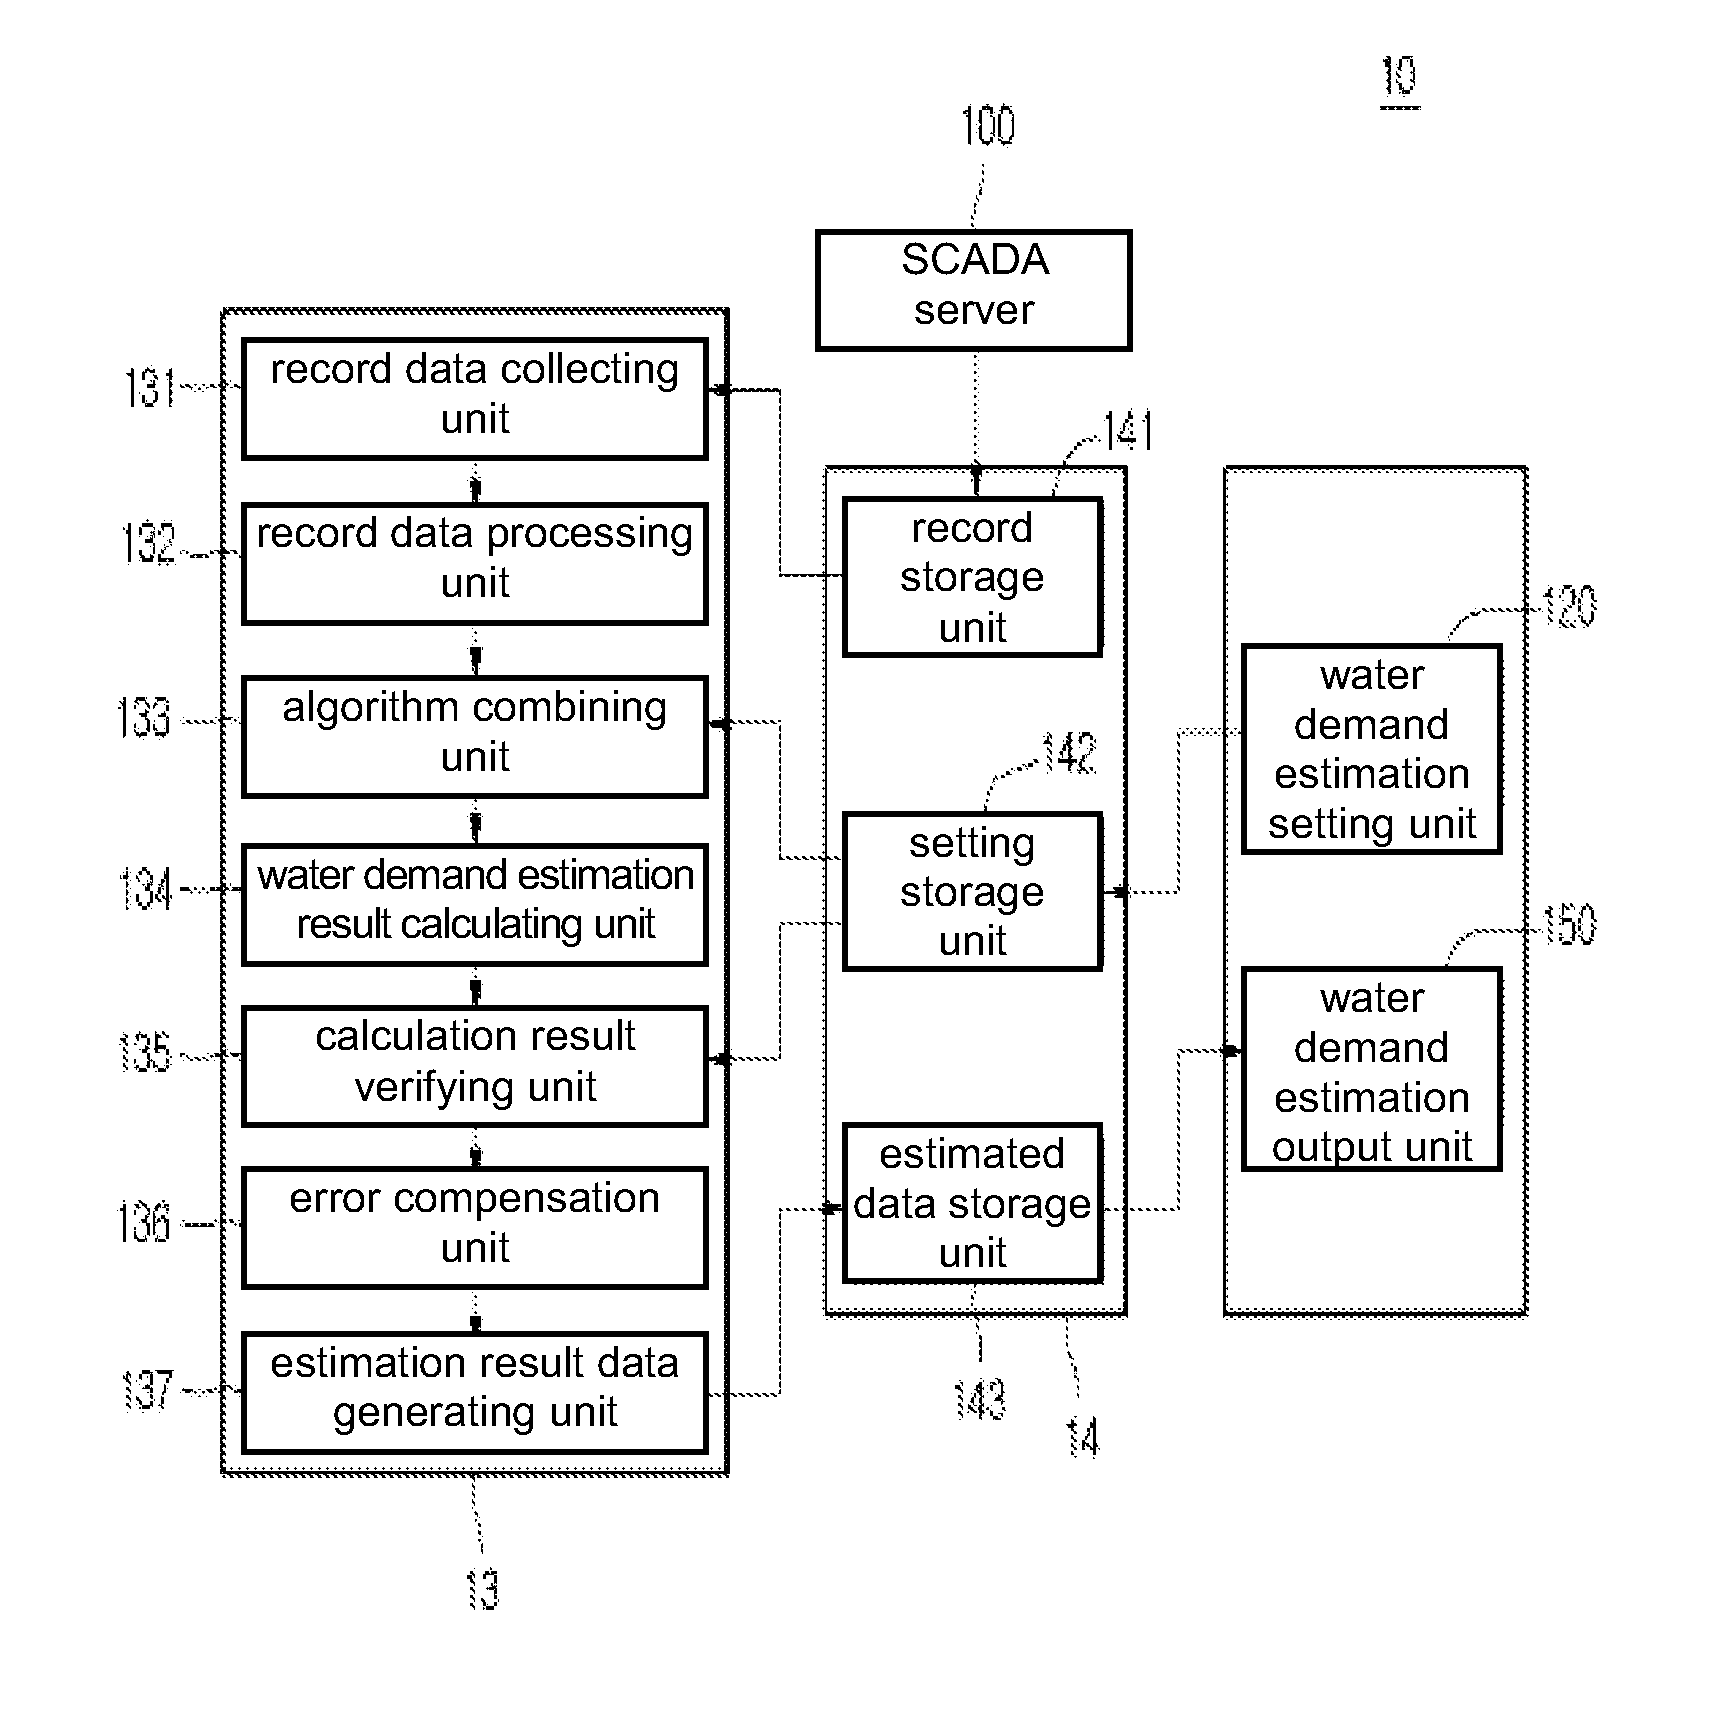 Apparatus for forecasting water demand